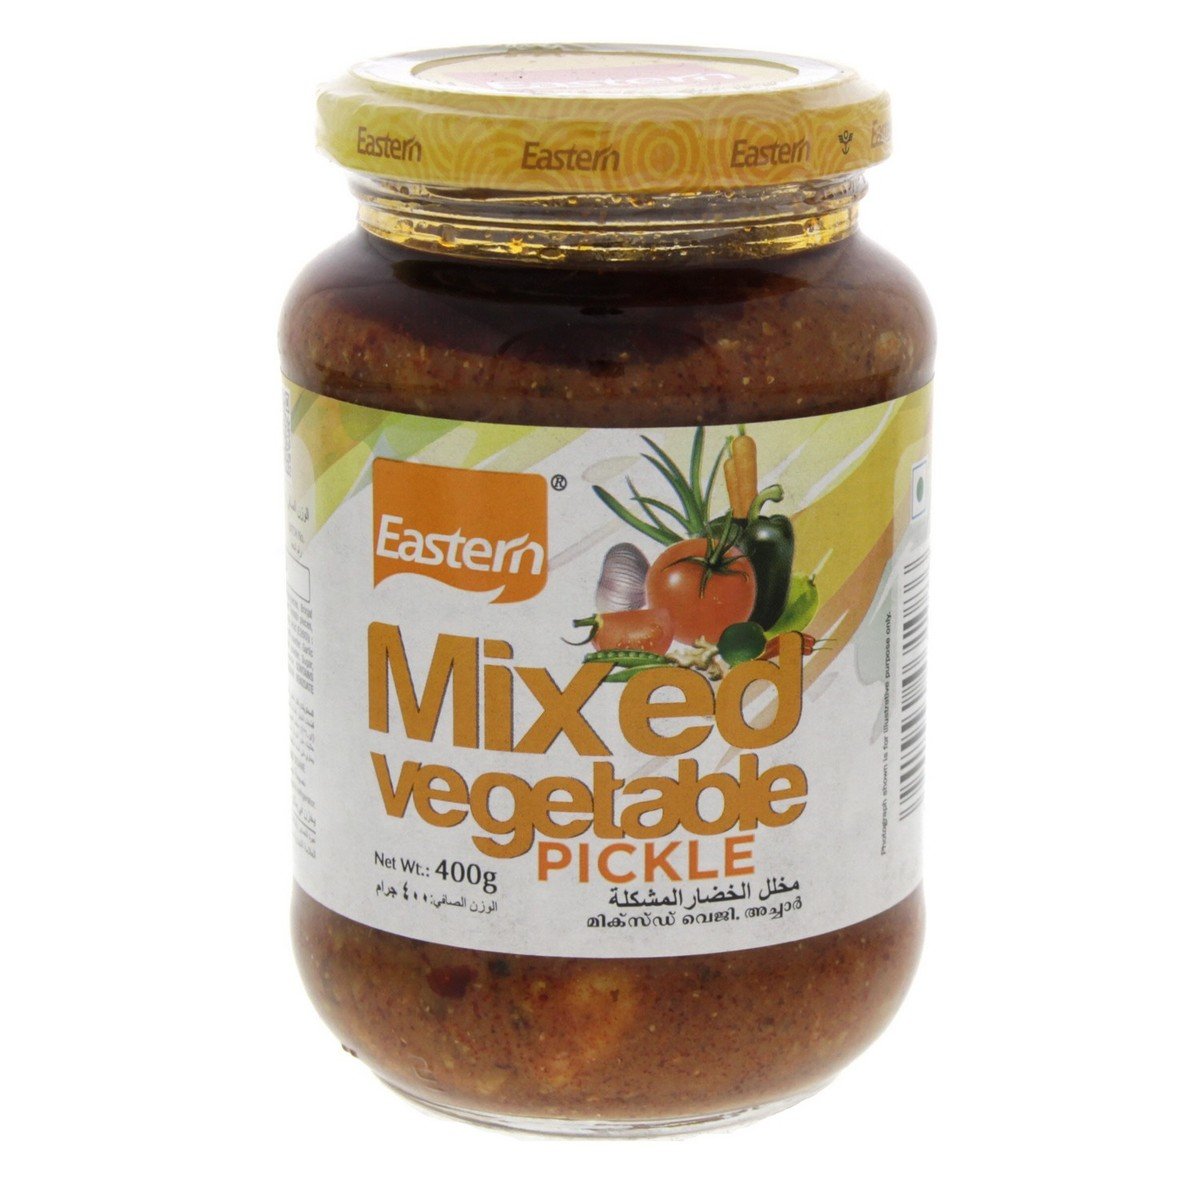 Eastern Mixed Vegetable Pickle 400 g